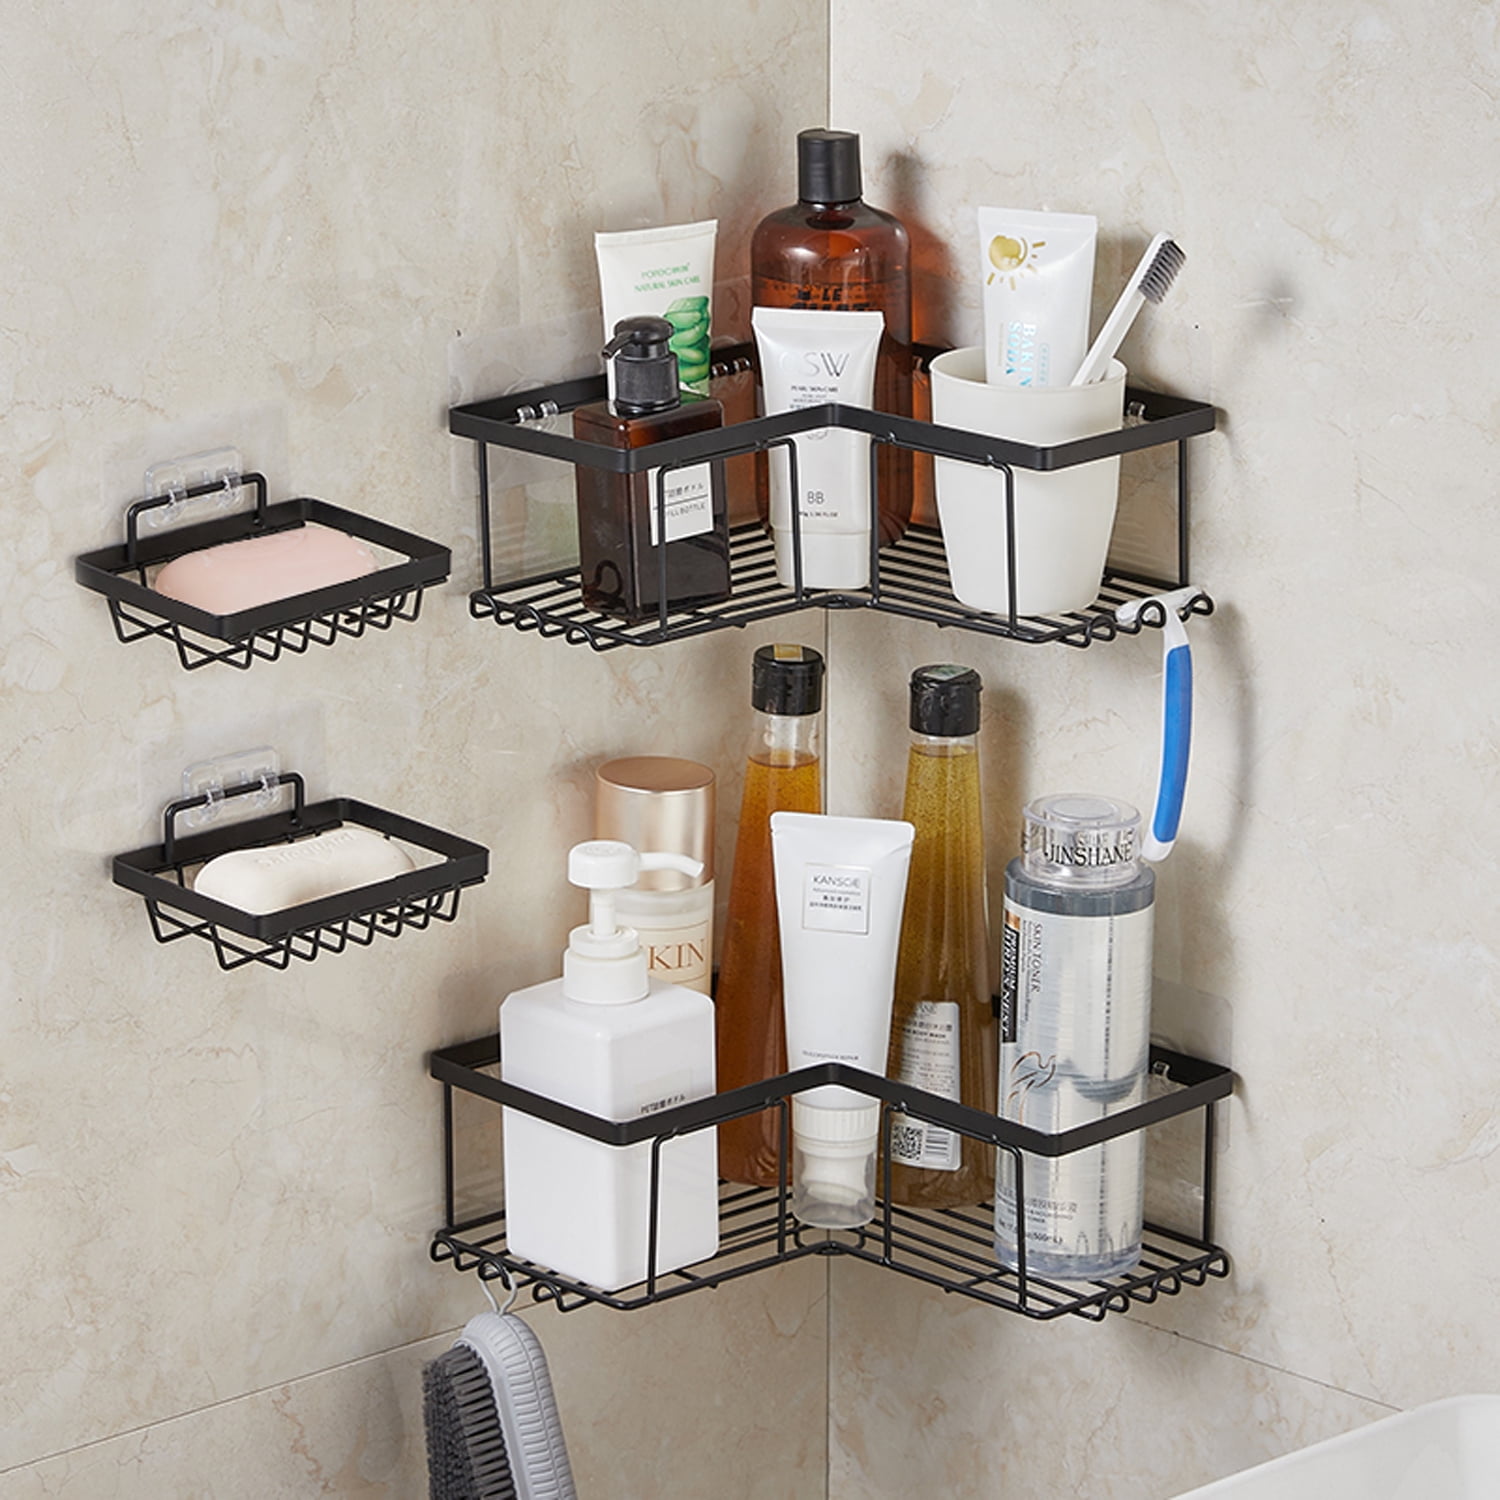 Huryfox Corner Shower Caddy, 3-Pack Adhesive Shower Shelf with Soap Dish and Hook, Stainless Steel Wall Mount Bathroom Shower Organizer (Black) 